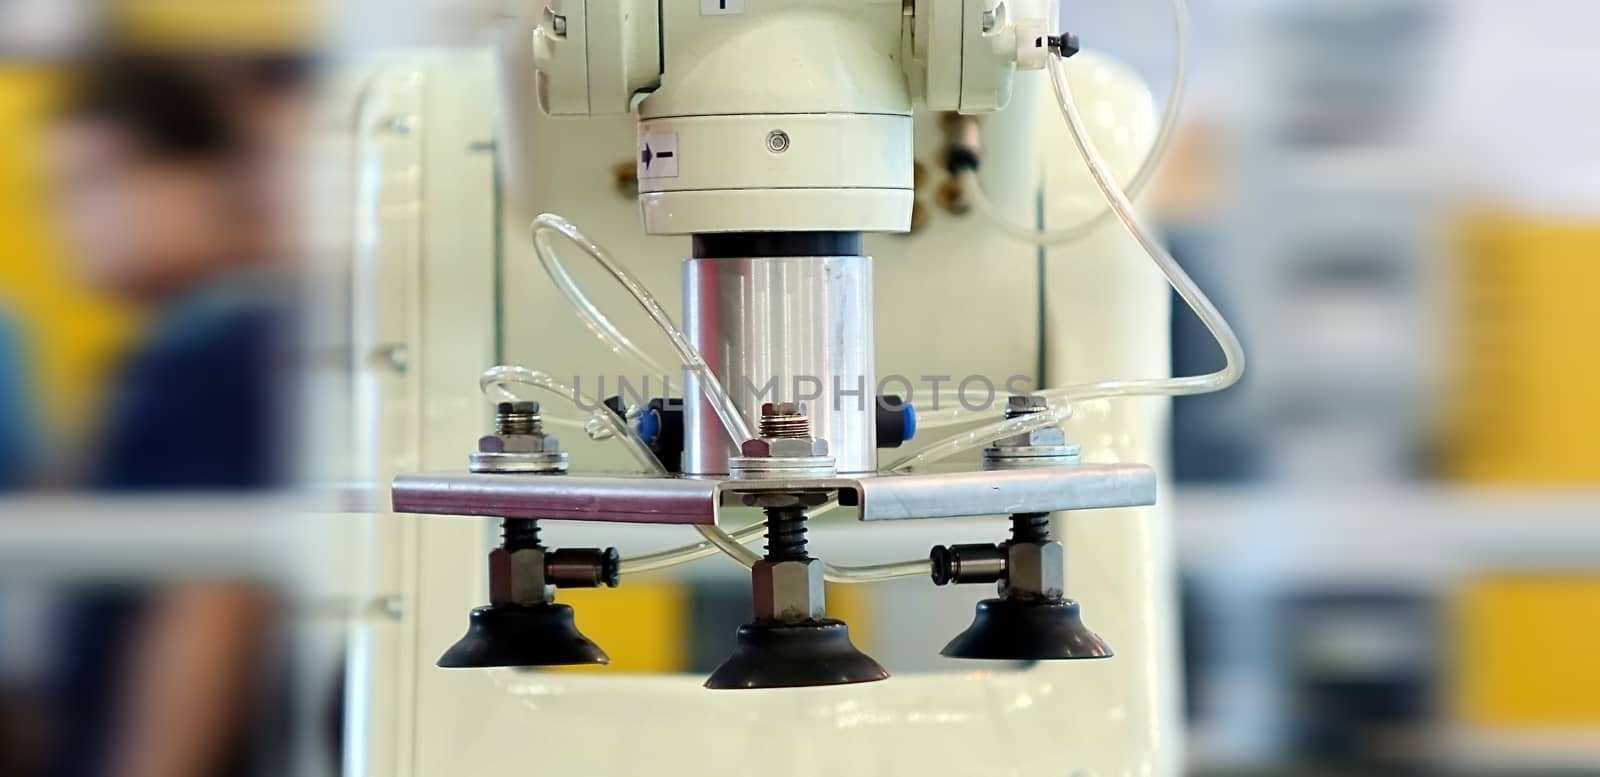 A high precision automated machine tool in operation
